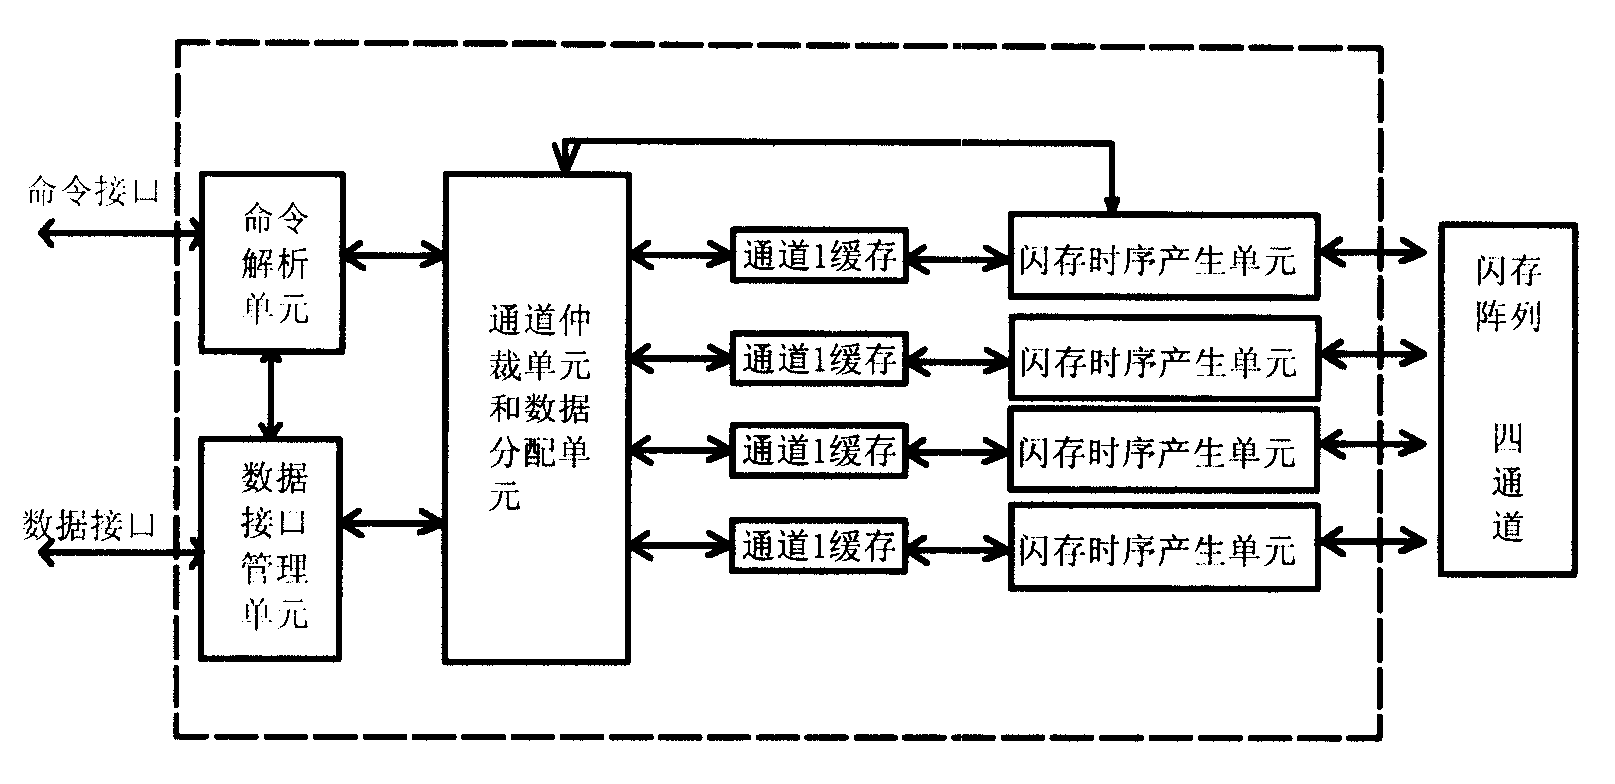 Multi-channel flash memory chip array structure and write-in and read-out methods thereof